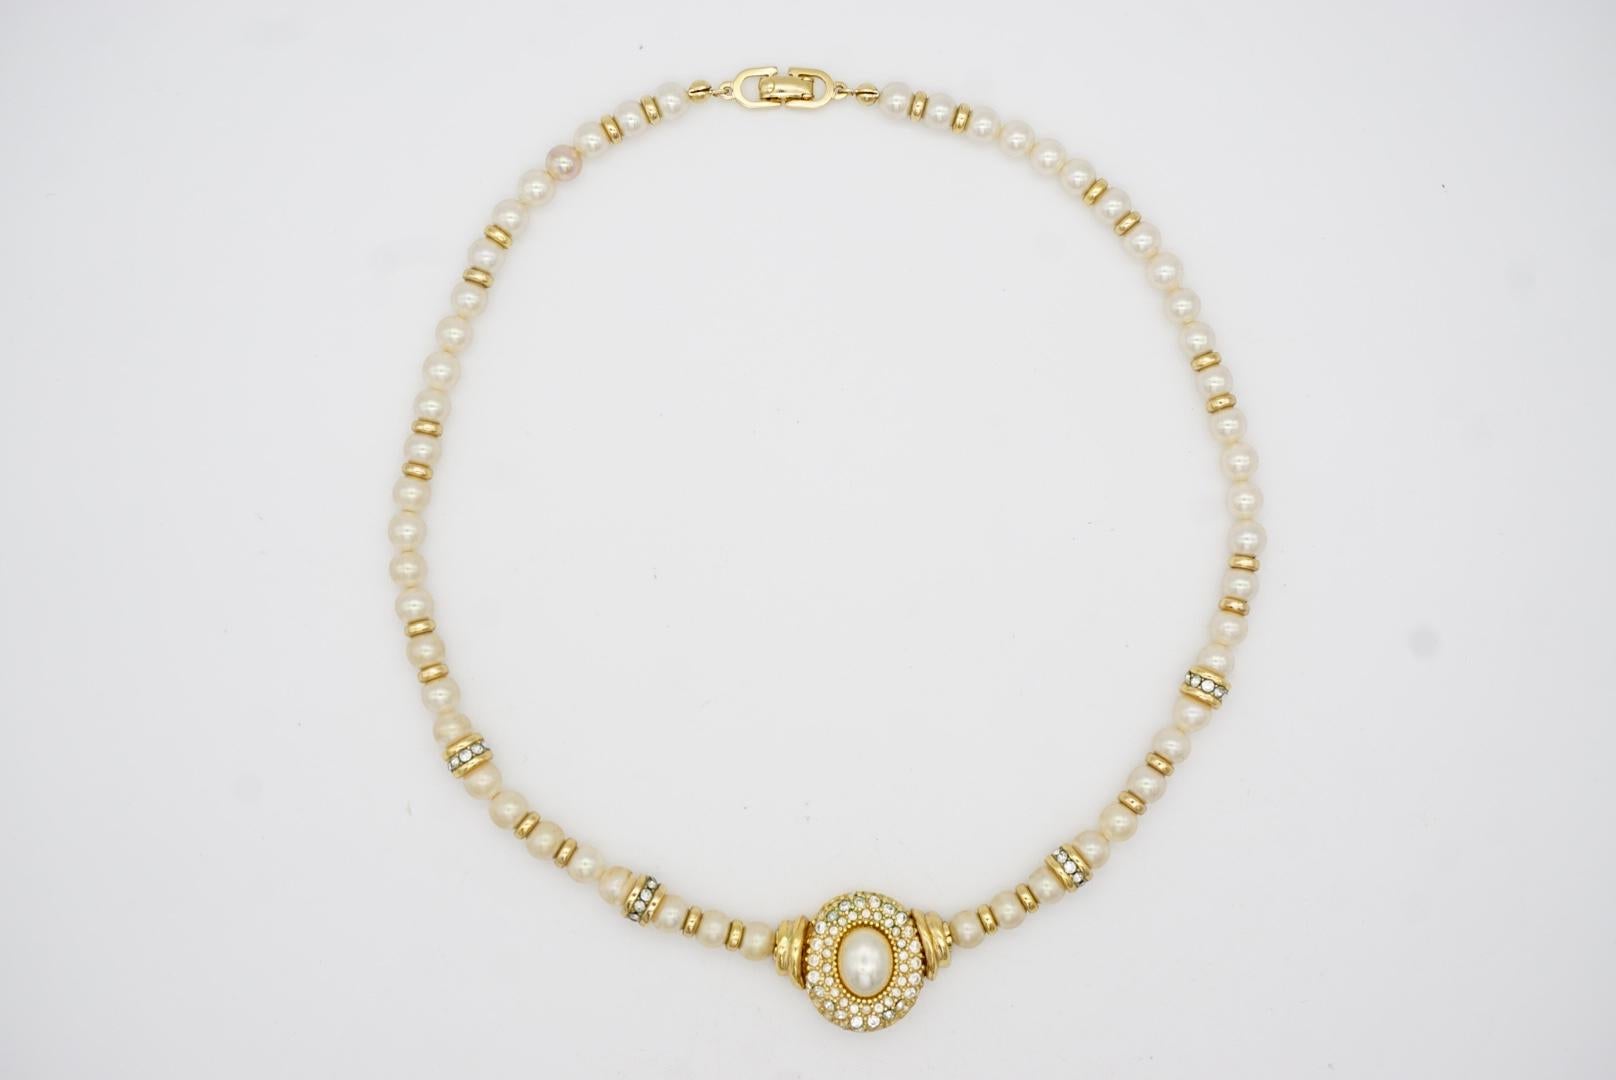 Christian Dior Vintage 1980s White Round Oval Pearl Crystals Pendant Necklace For Sale 6